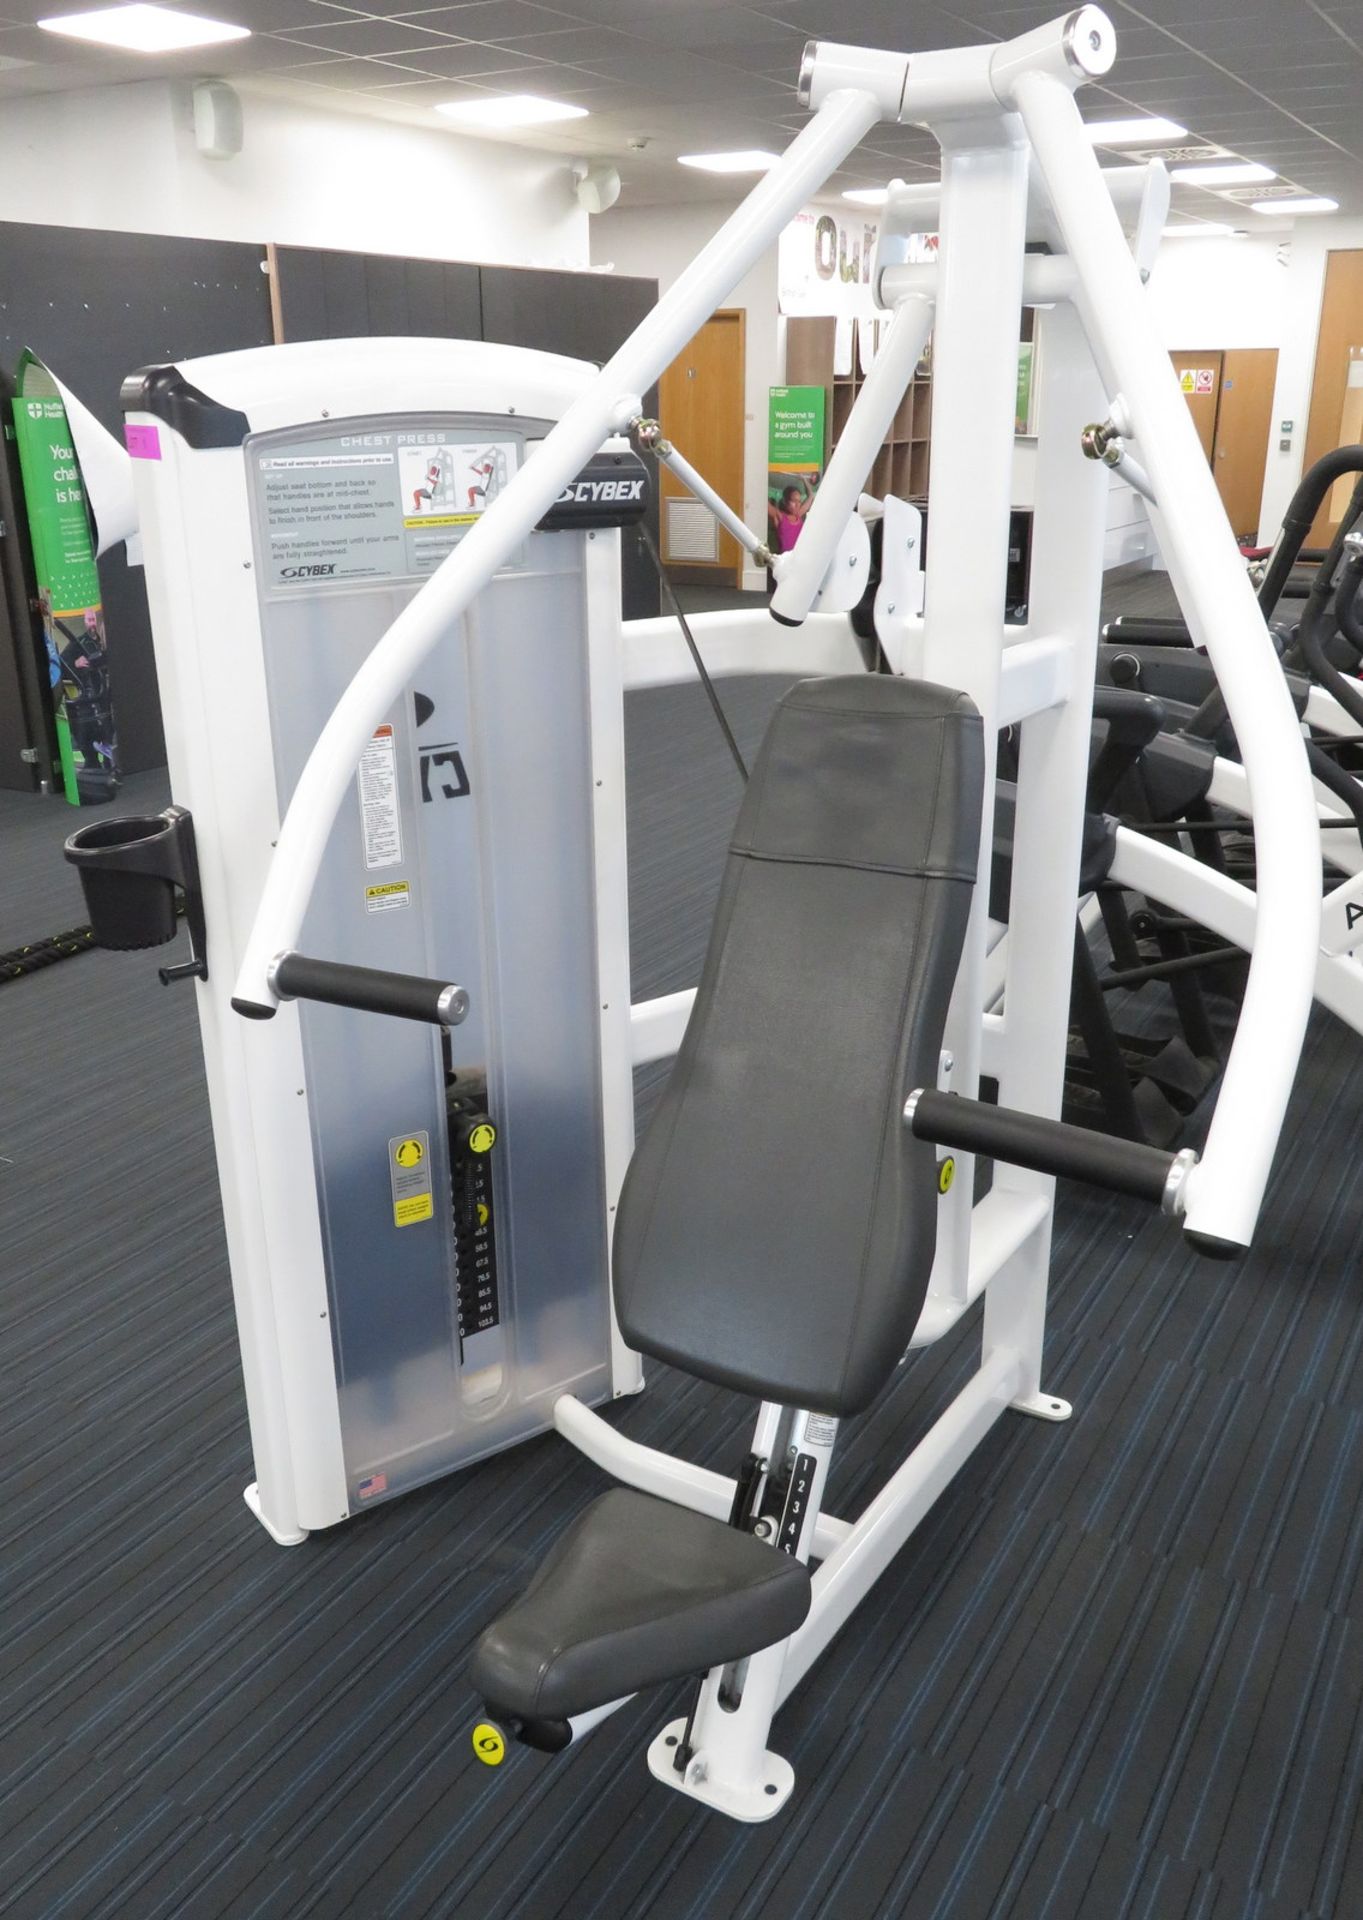 Cybex Chest Press Model: 12001. 103.5kg Weight Stack. Dimensions: 140x135x195cm (LxDxH) Pl - Image 2 of 8